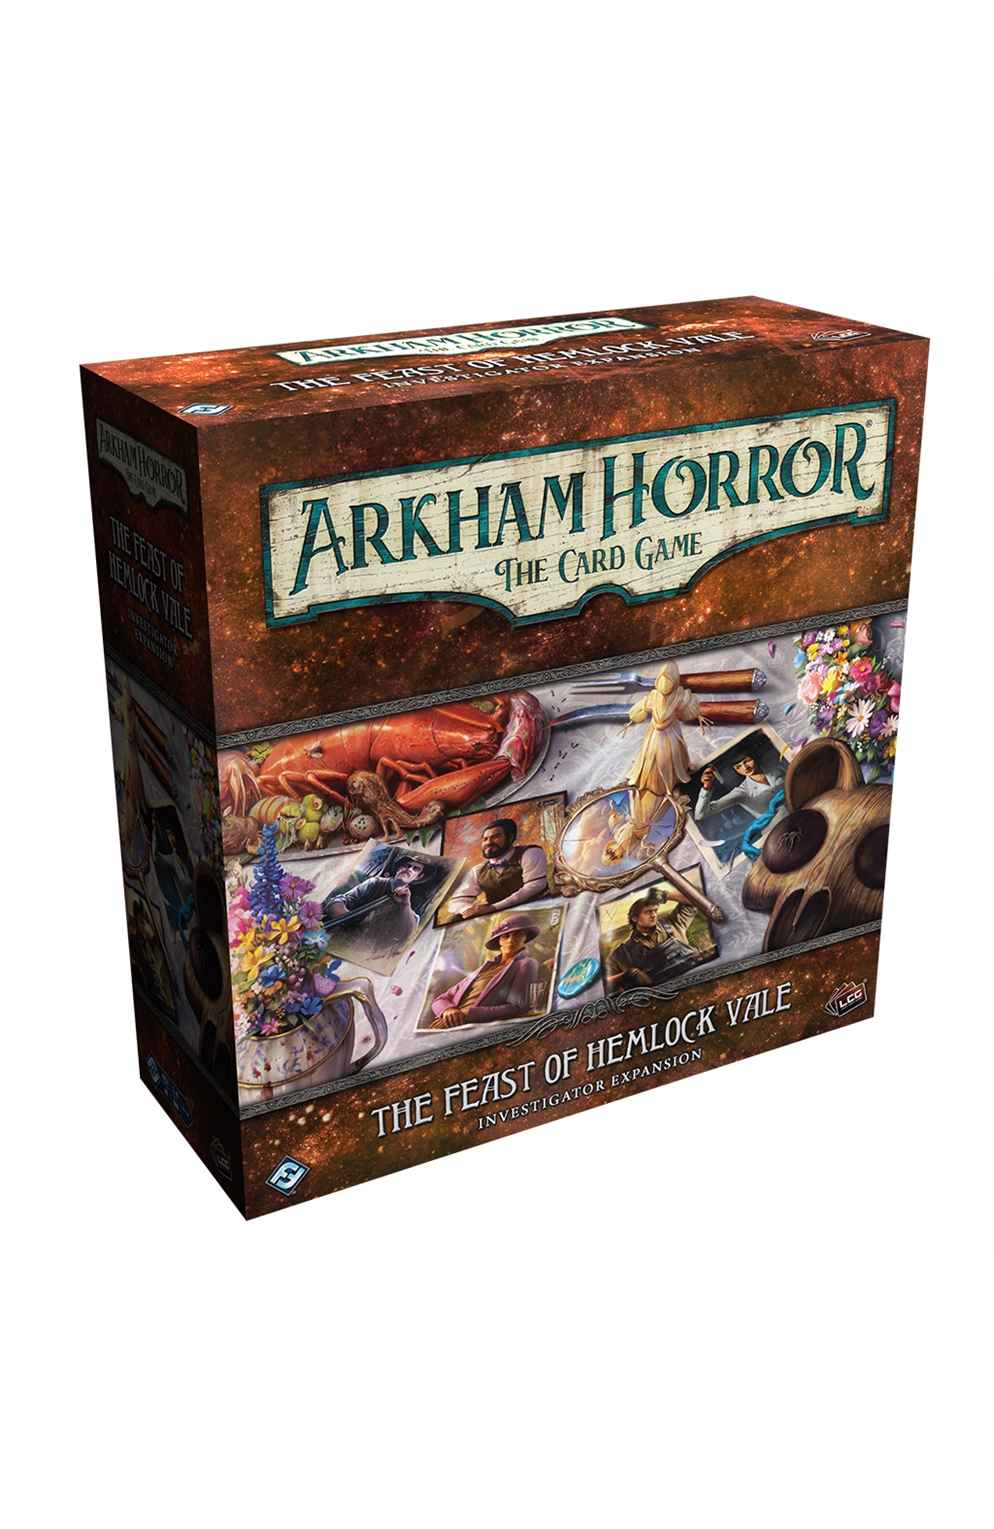 Arkham Horror The Card Game: The Feast of Hemlock Vale Investigator Expansion